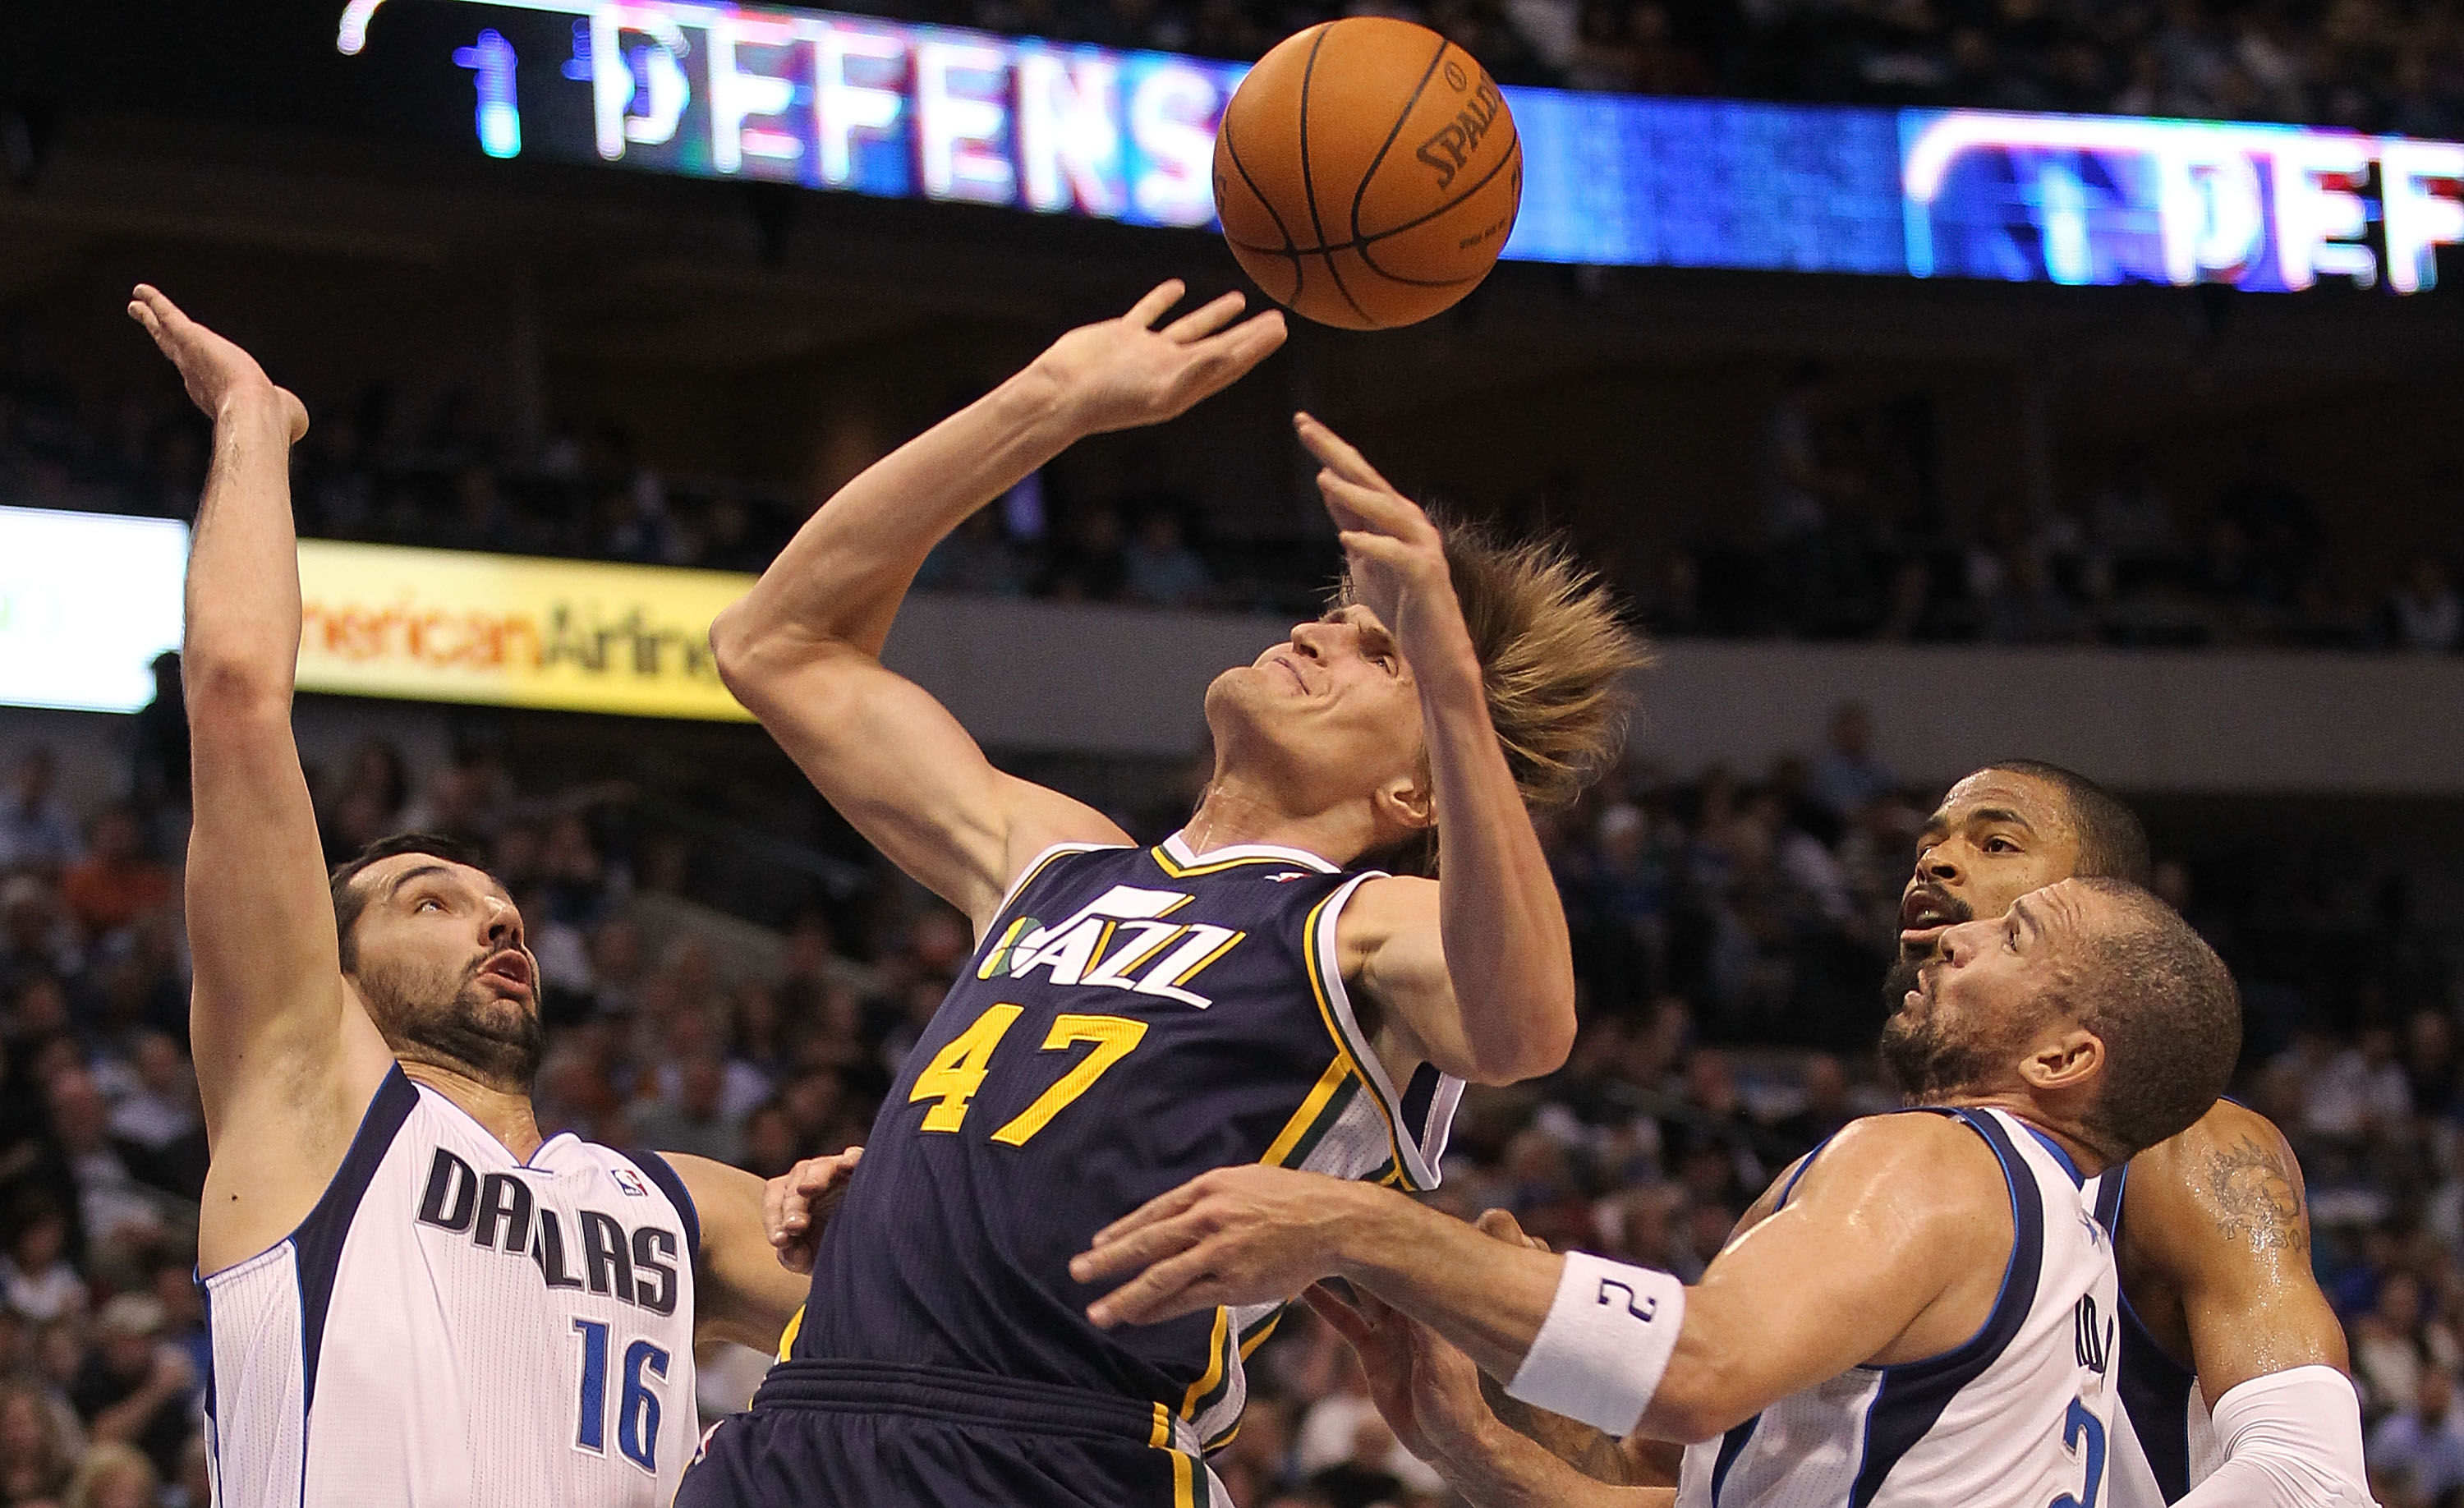 DALLAS, TX - FEBRUARY 23:  Forward Anrei Kirilenko #47 of the Utah Jazz is fouled by Jason Kidd #2 of the Dallas Mavericks at American Airlines Center on February 23, 2011 in Dallas, Texas.  NOTE TO USER: User expressly acknowledges and agrees that, by do